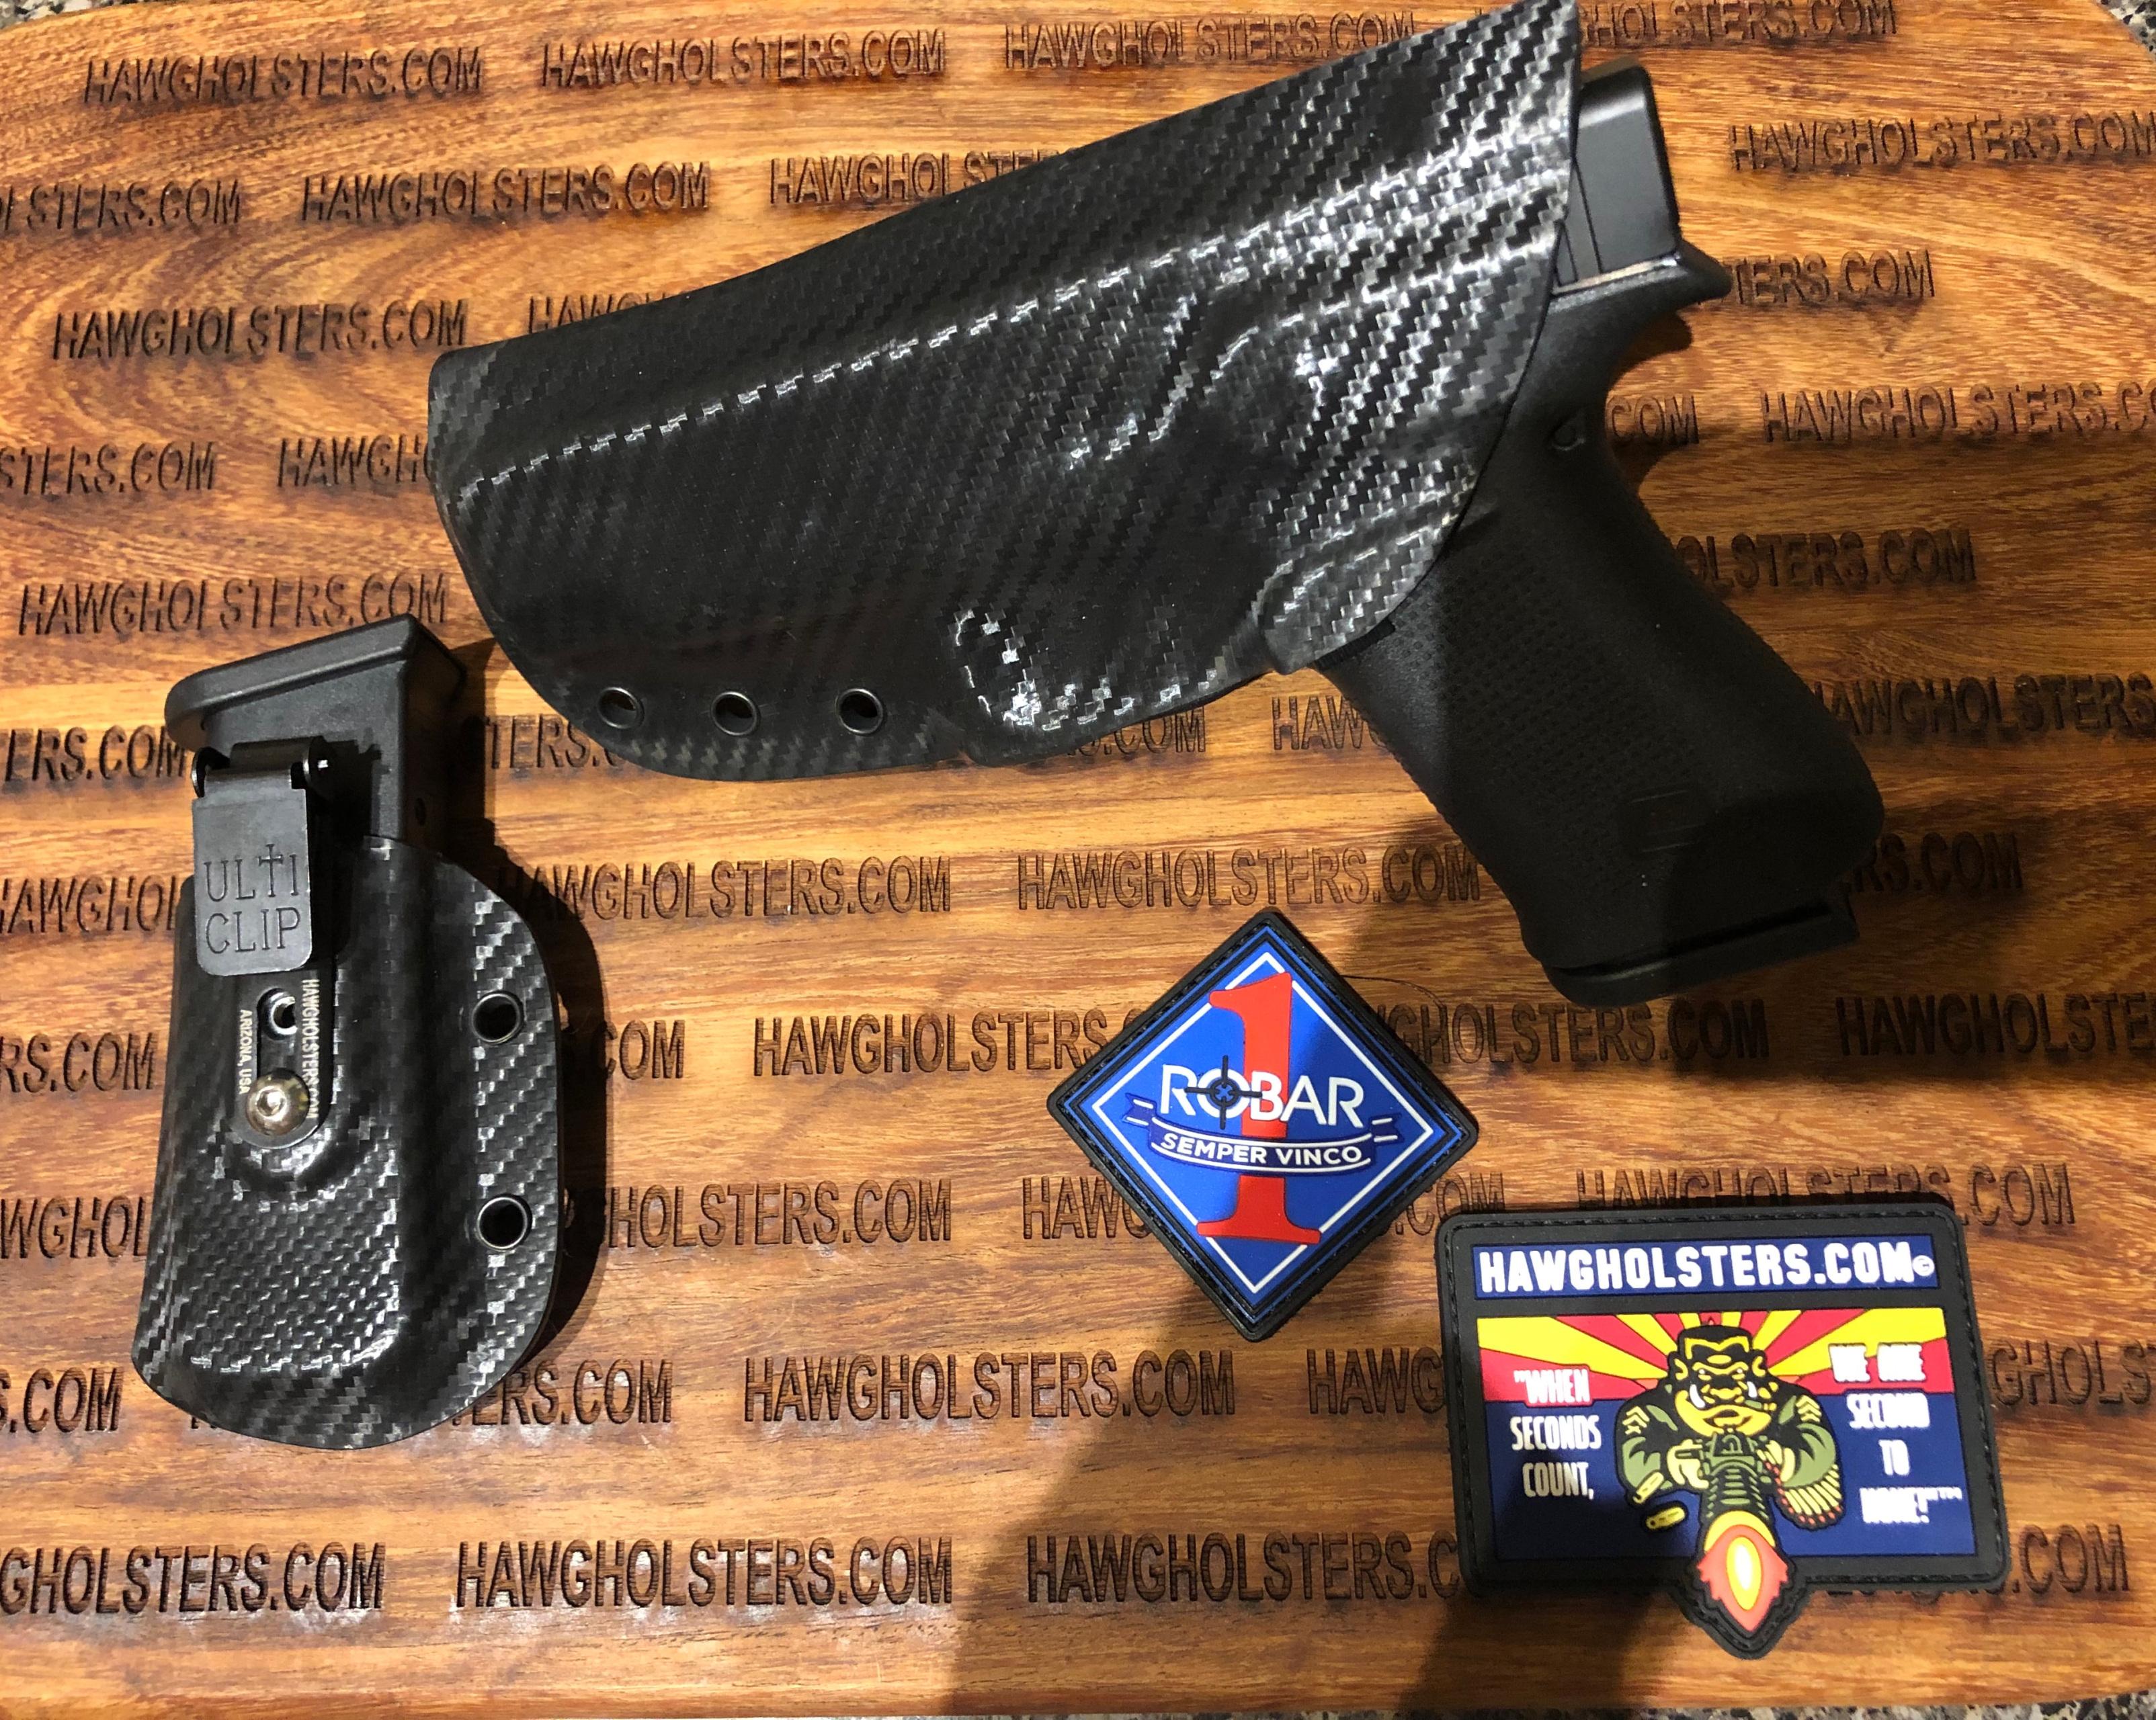 Ulti Clip Holster - Complete Weapon Solutions